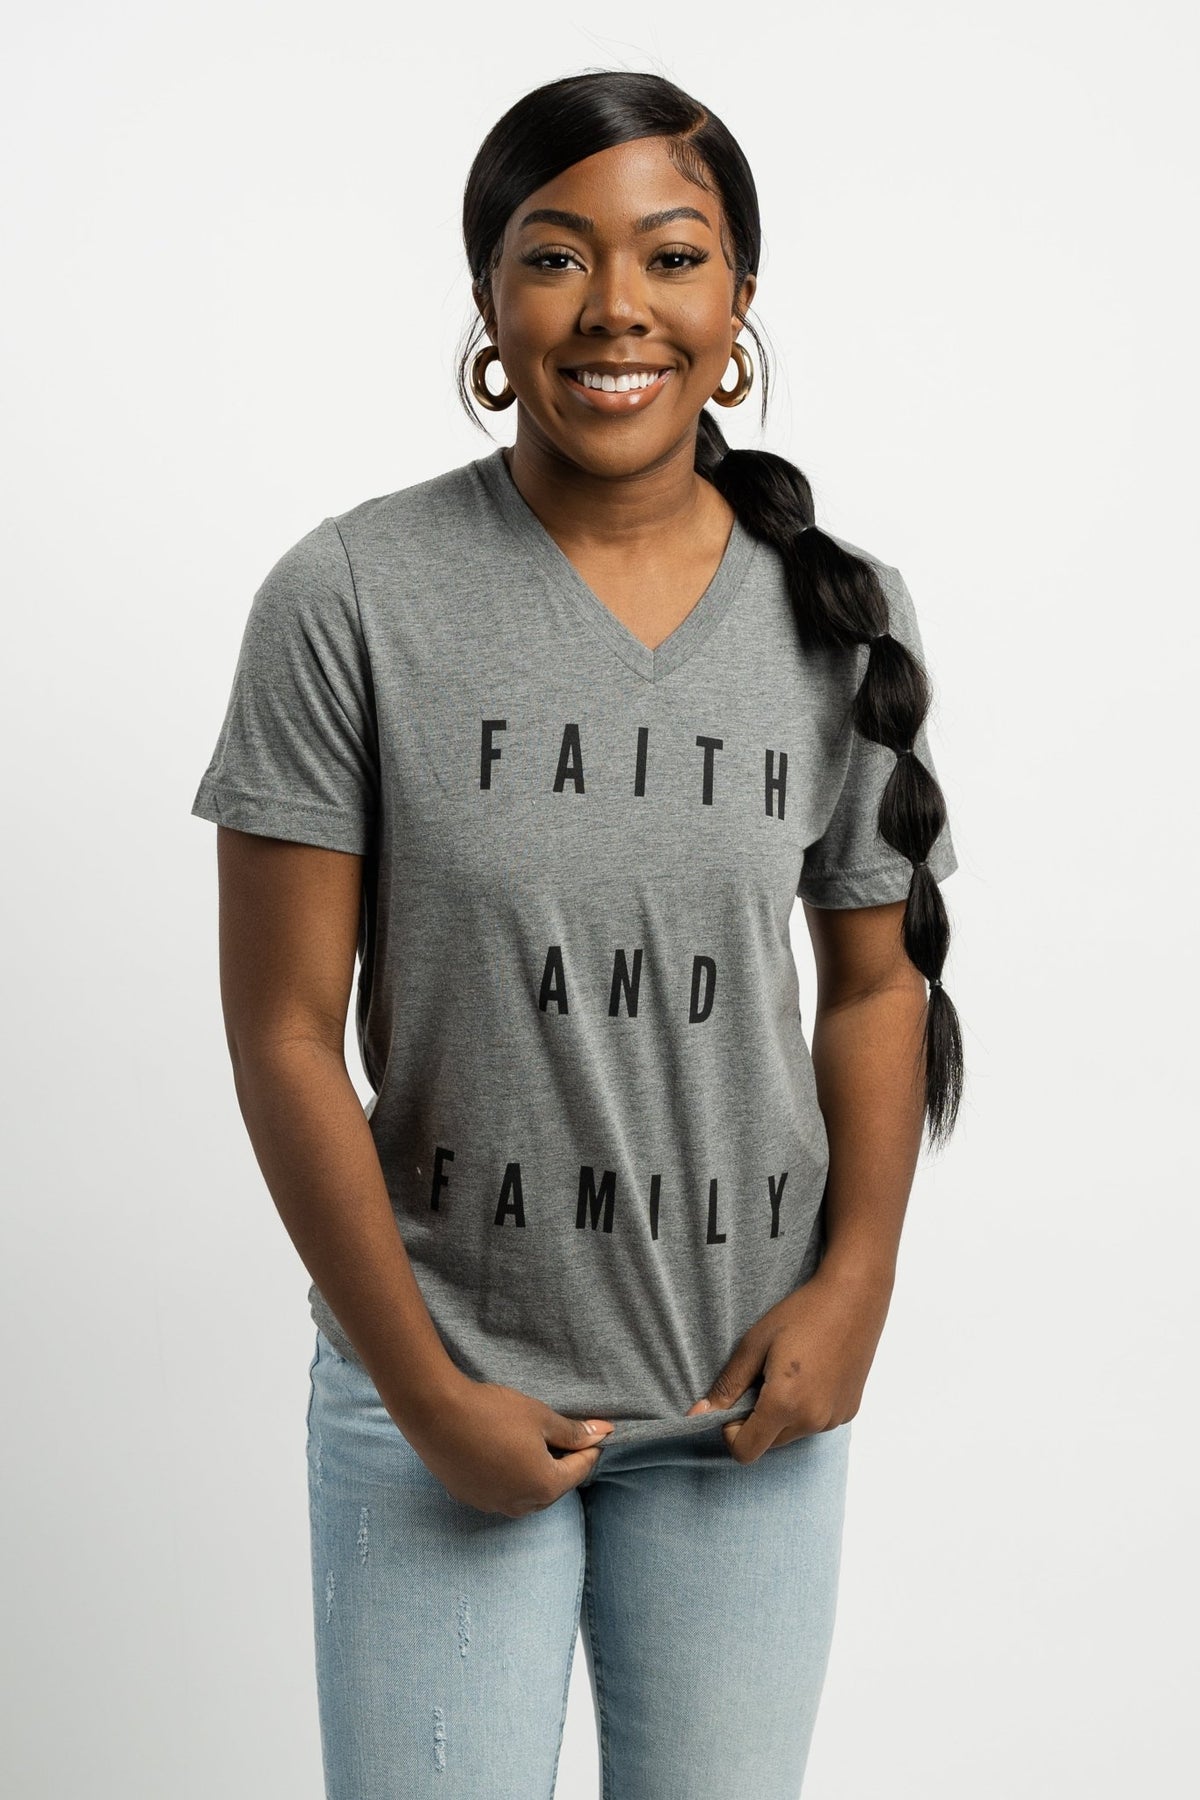 Faith and Family unisex short sleeve v-neck t-shirt grey - Stylish T-shirts - Trendy Graphic T-Shirts and Tank Tops at Lush Fashion Lounge Boutique in Oklahoma City